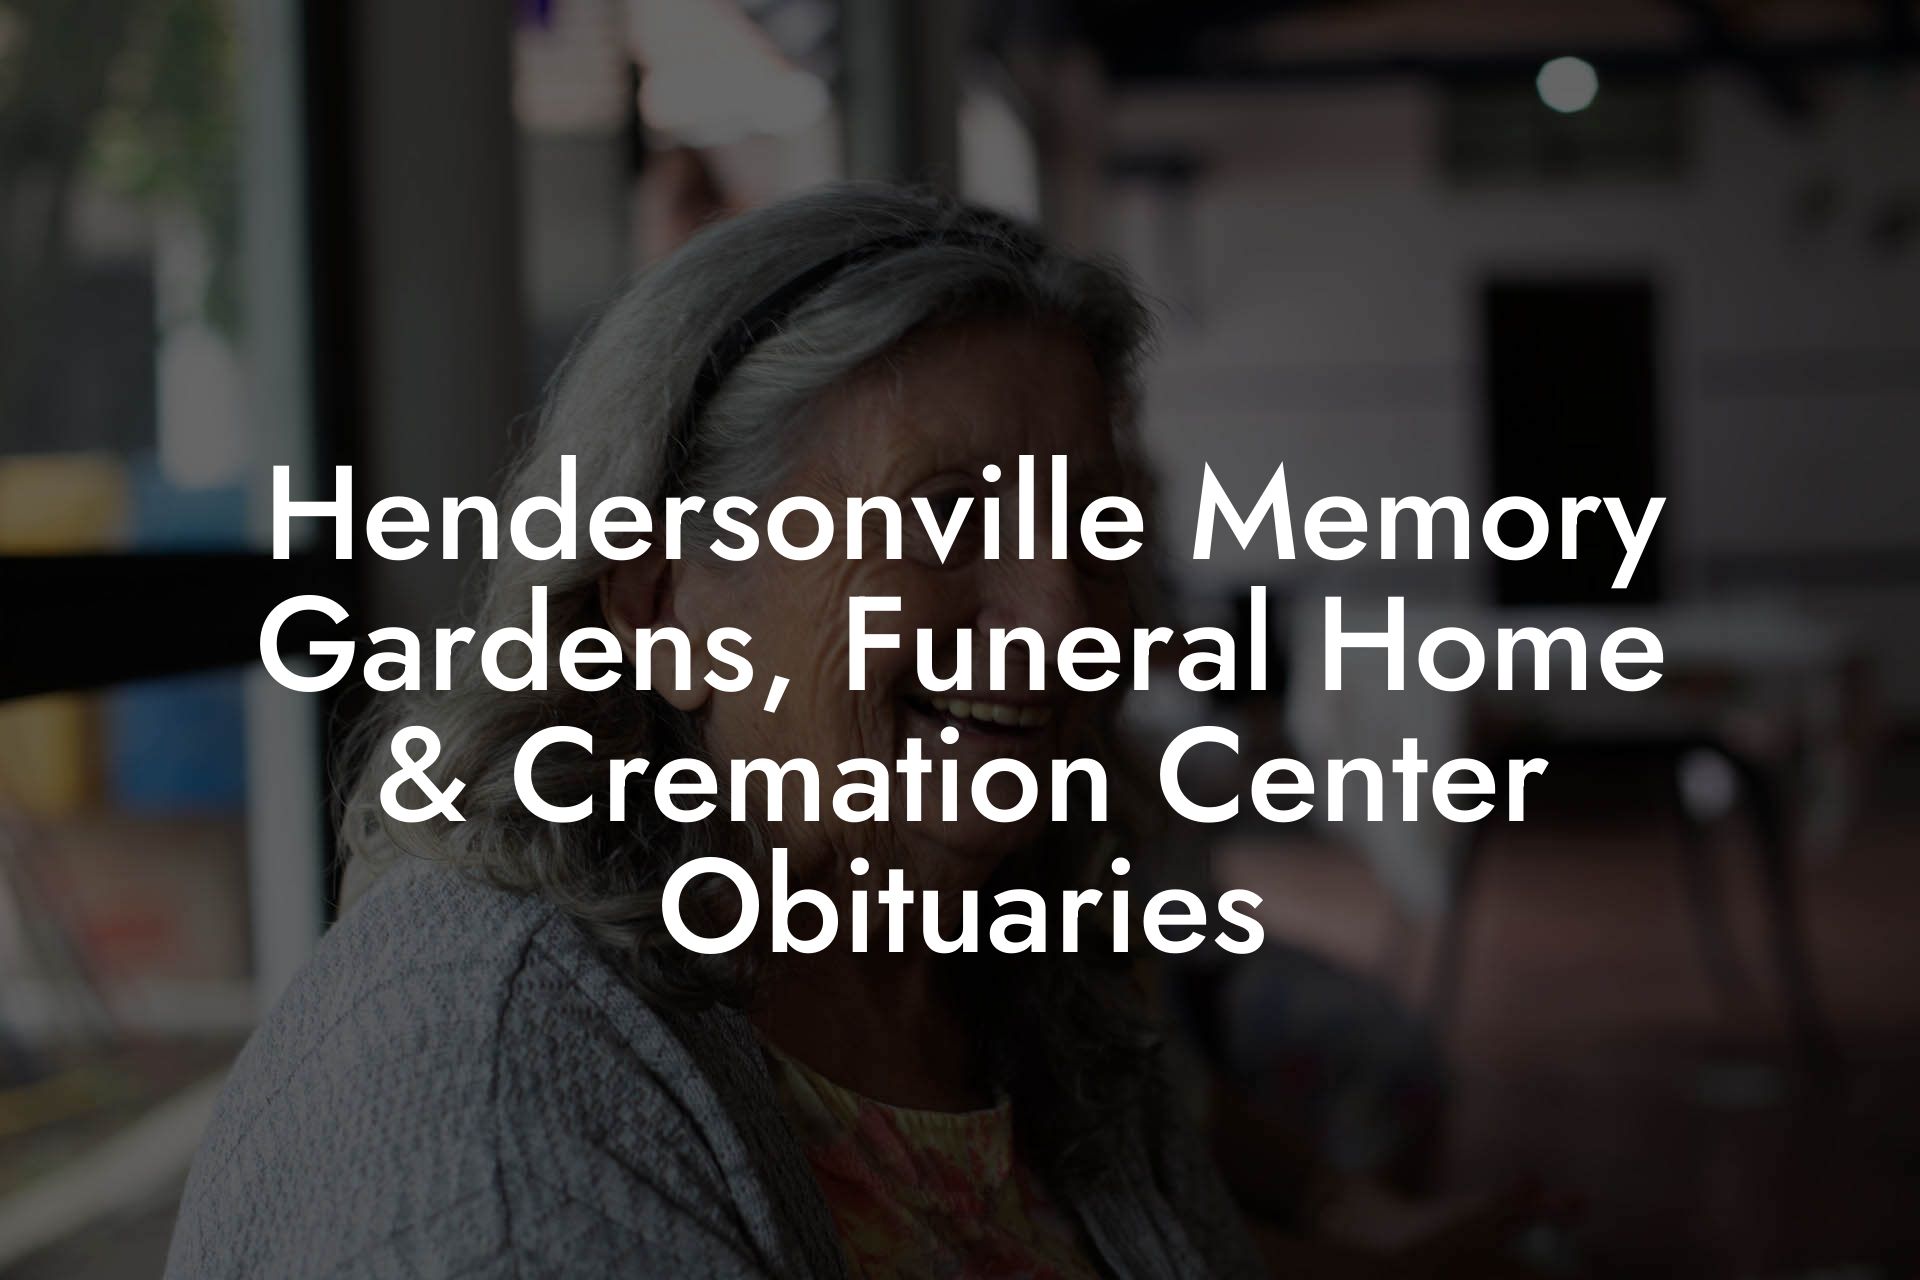 Hendersonville Memory Gardens, Funeral Home & Cremation Center Obituaries